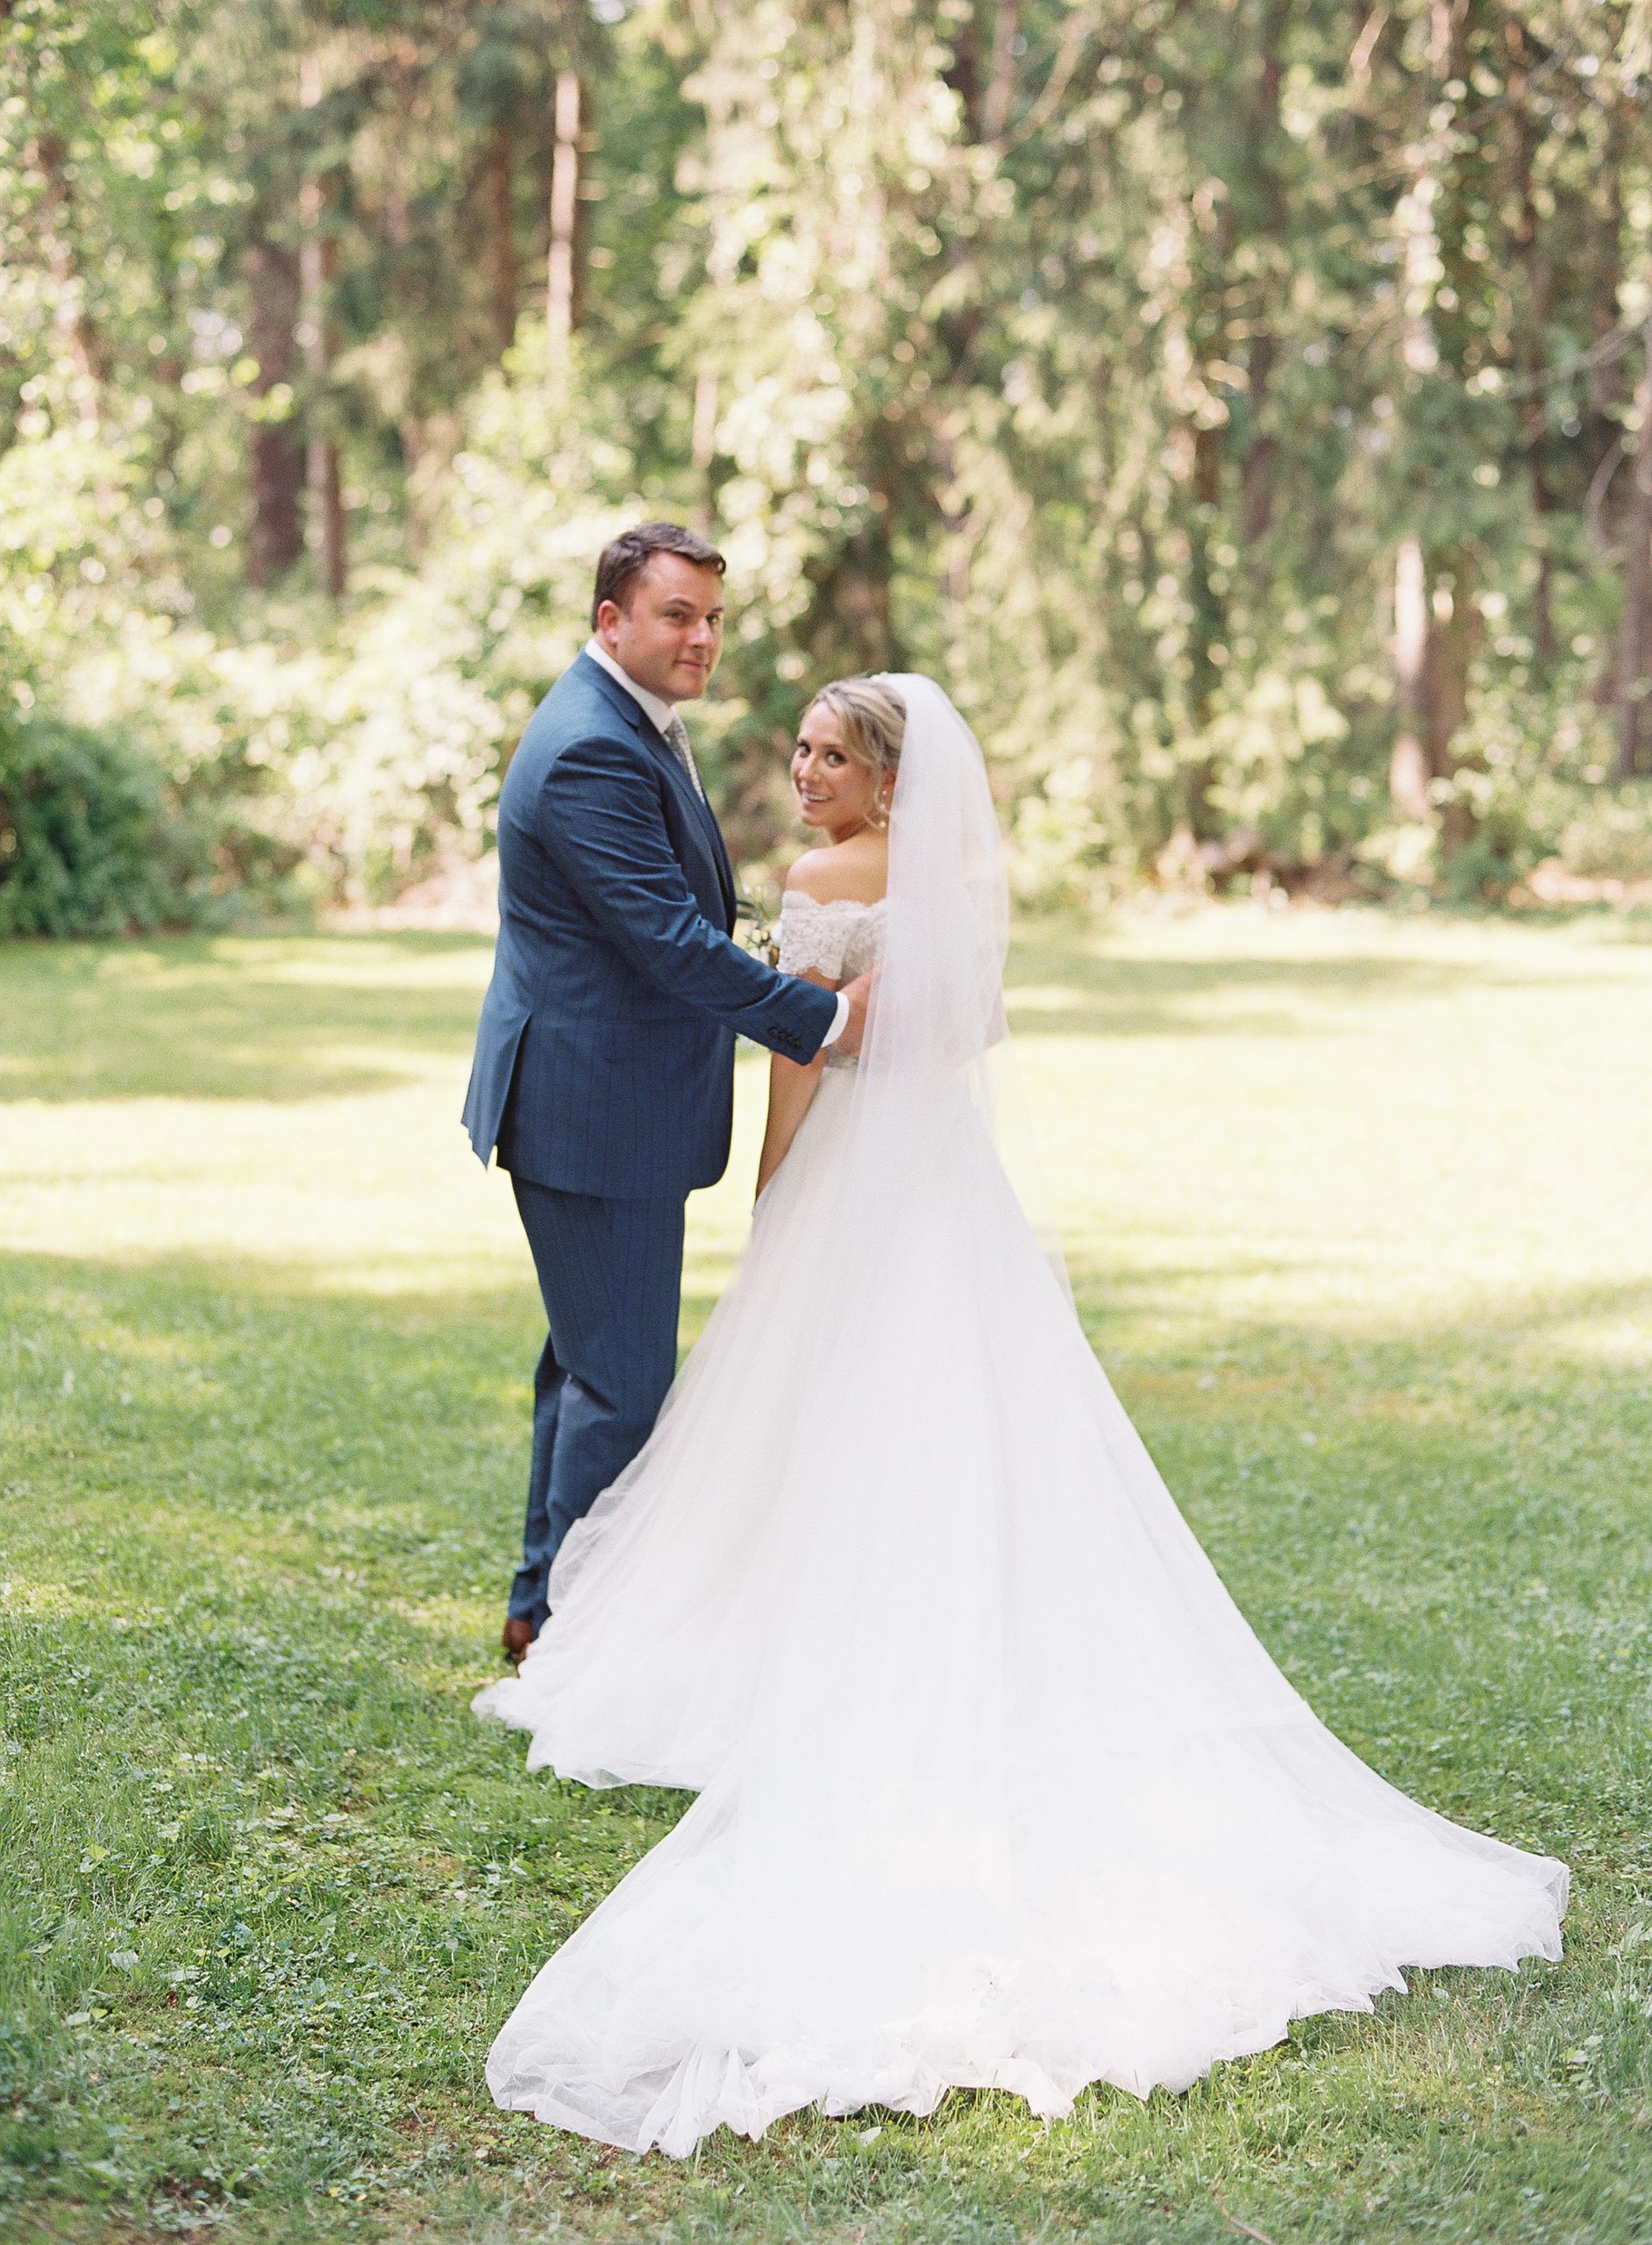 Kylie and Dylan's Whimsical Backyard Wedding in Fox Chapel